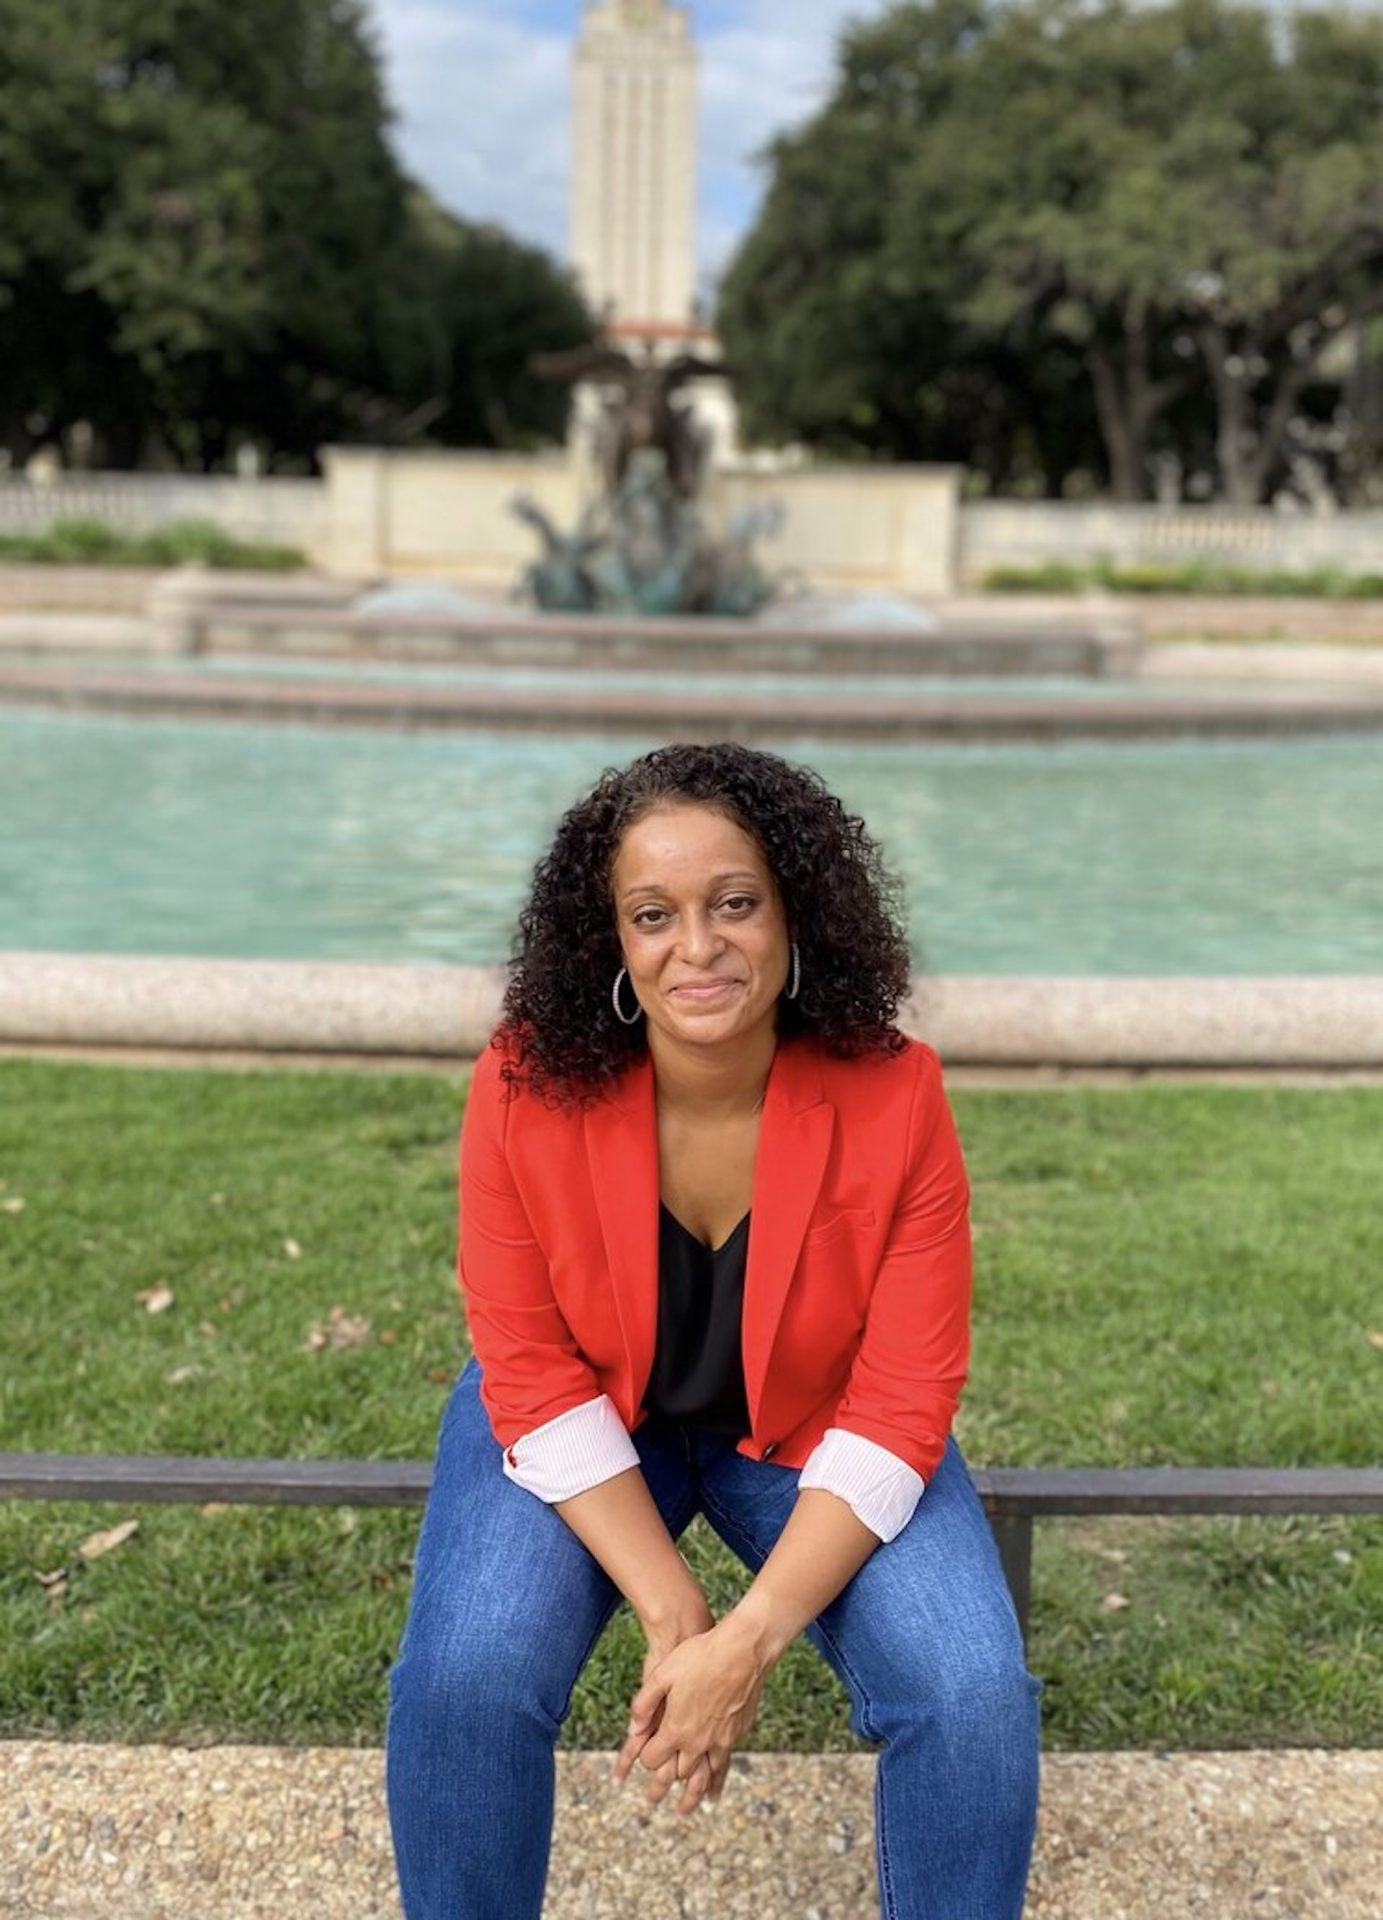 Danielle Pilar Clealand is an Afro-Puerto Rican who has researched different Latino experiences.